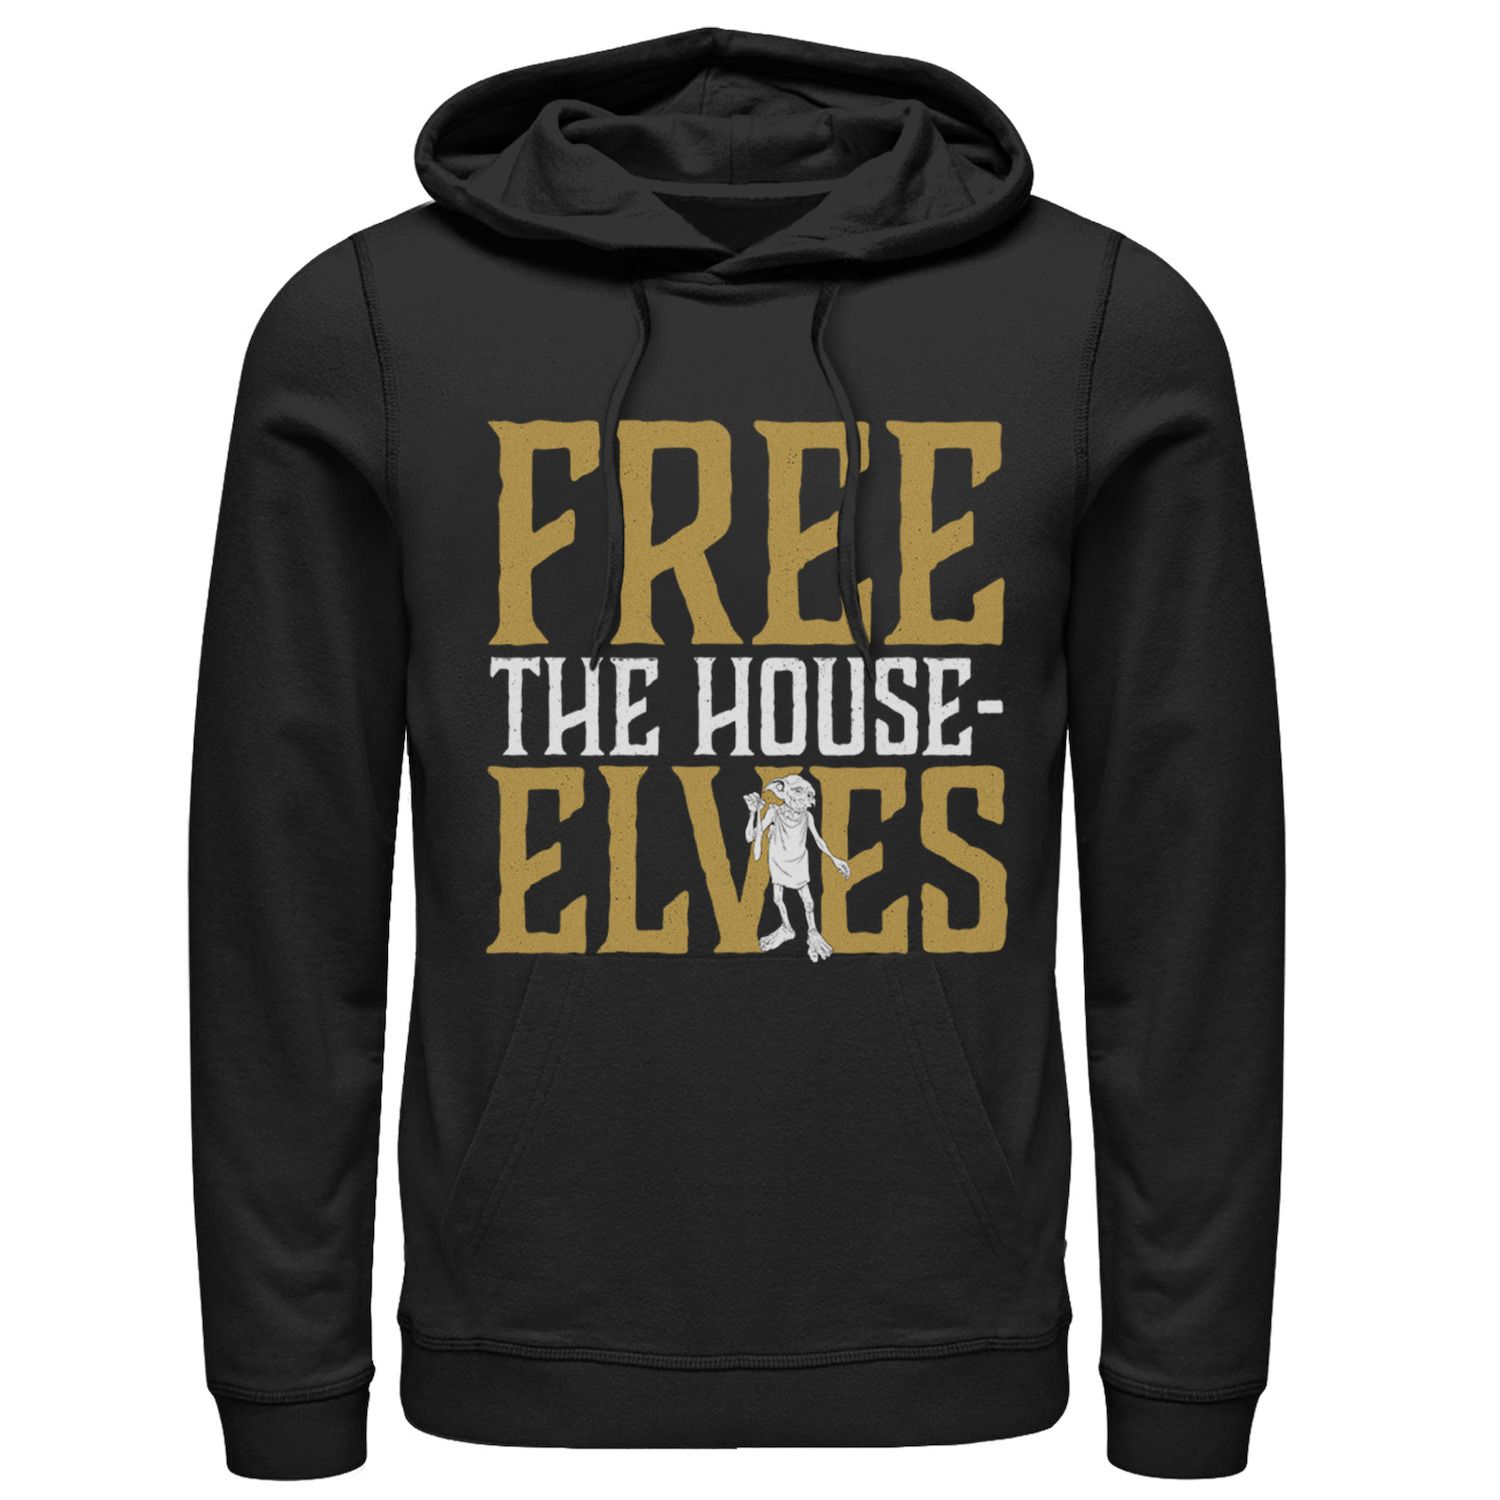 Image for Harry Potter Men's Dobby Free The House-Elves Graphic Pullover Hoodie at Kohl's.